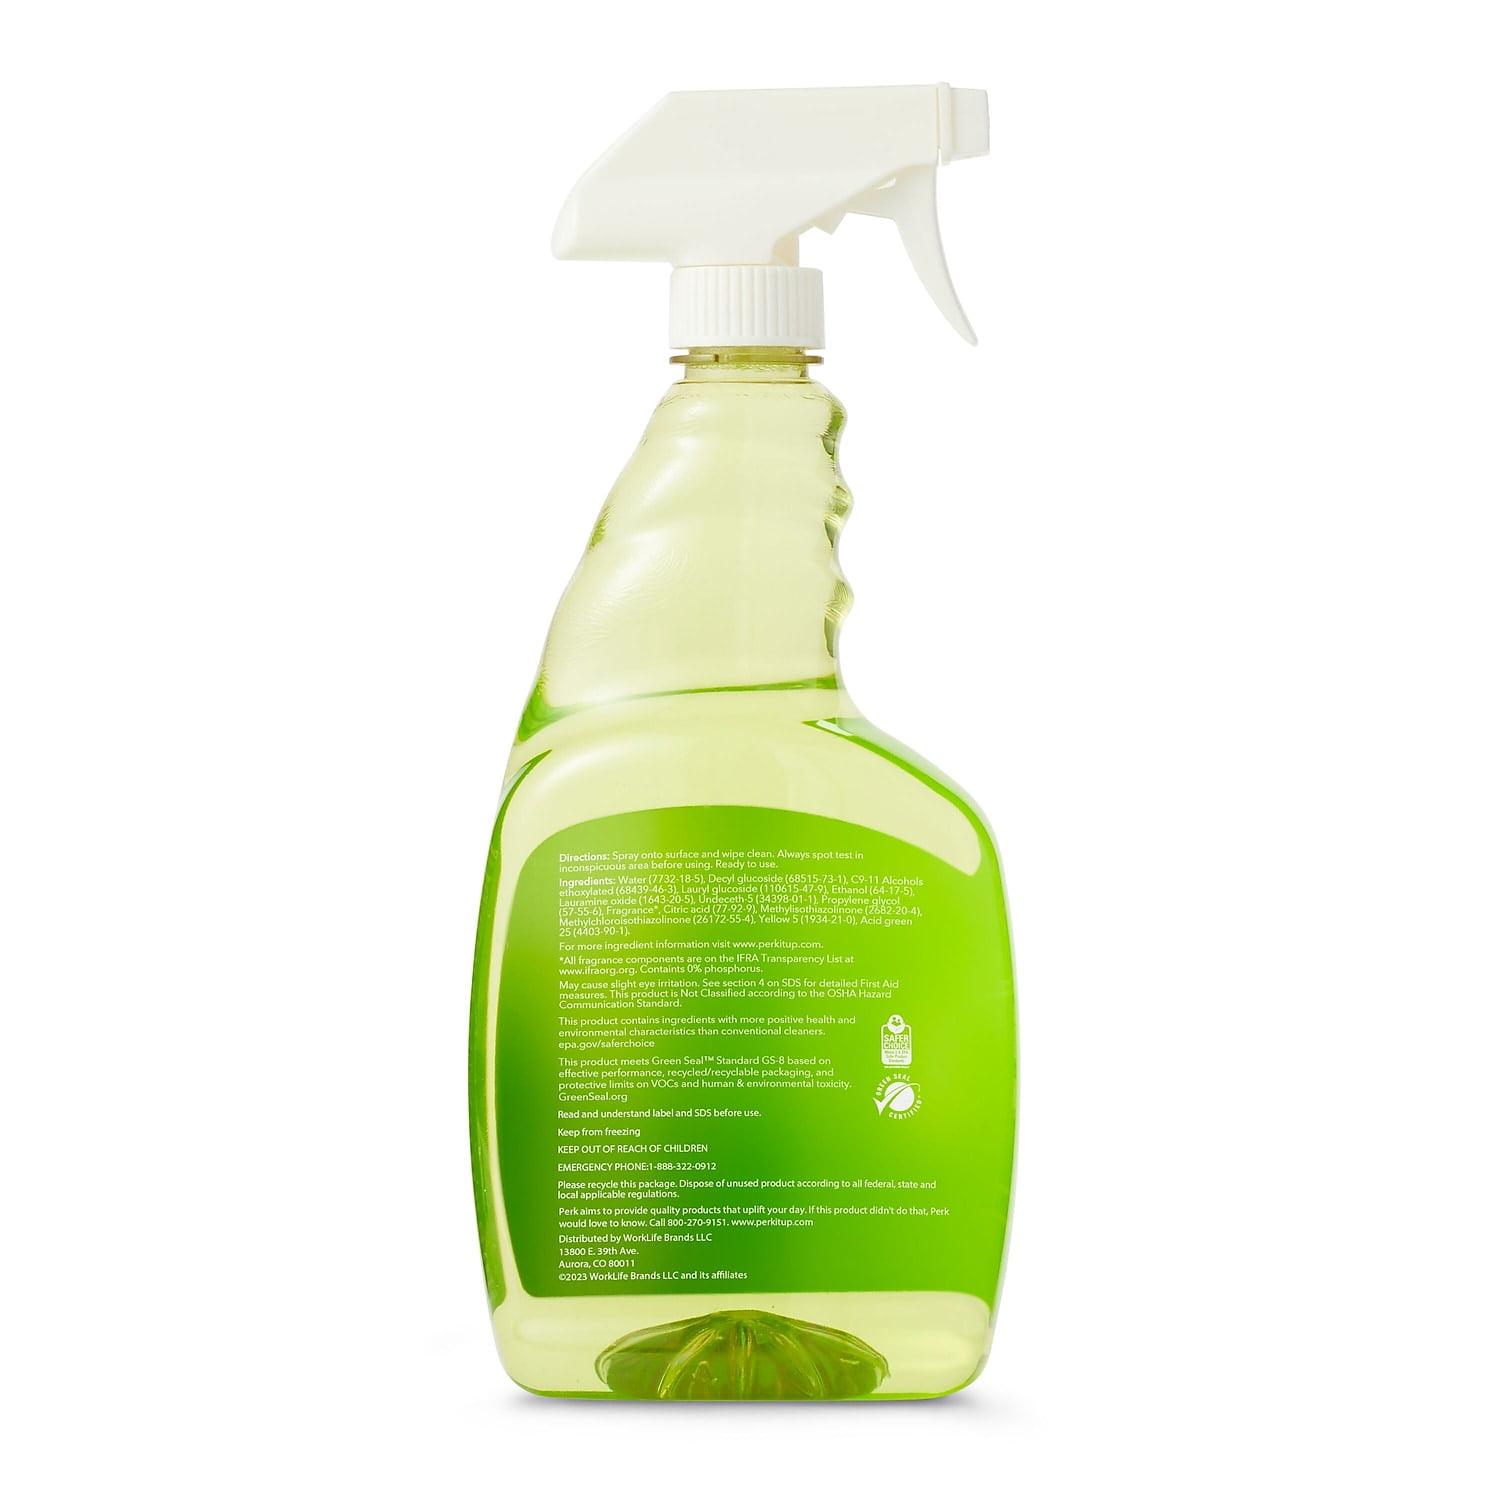 32 Effective Cleaning Products For Less Than $10